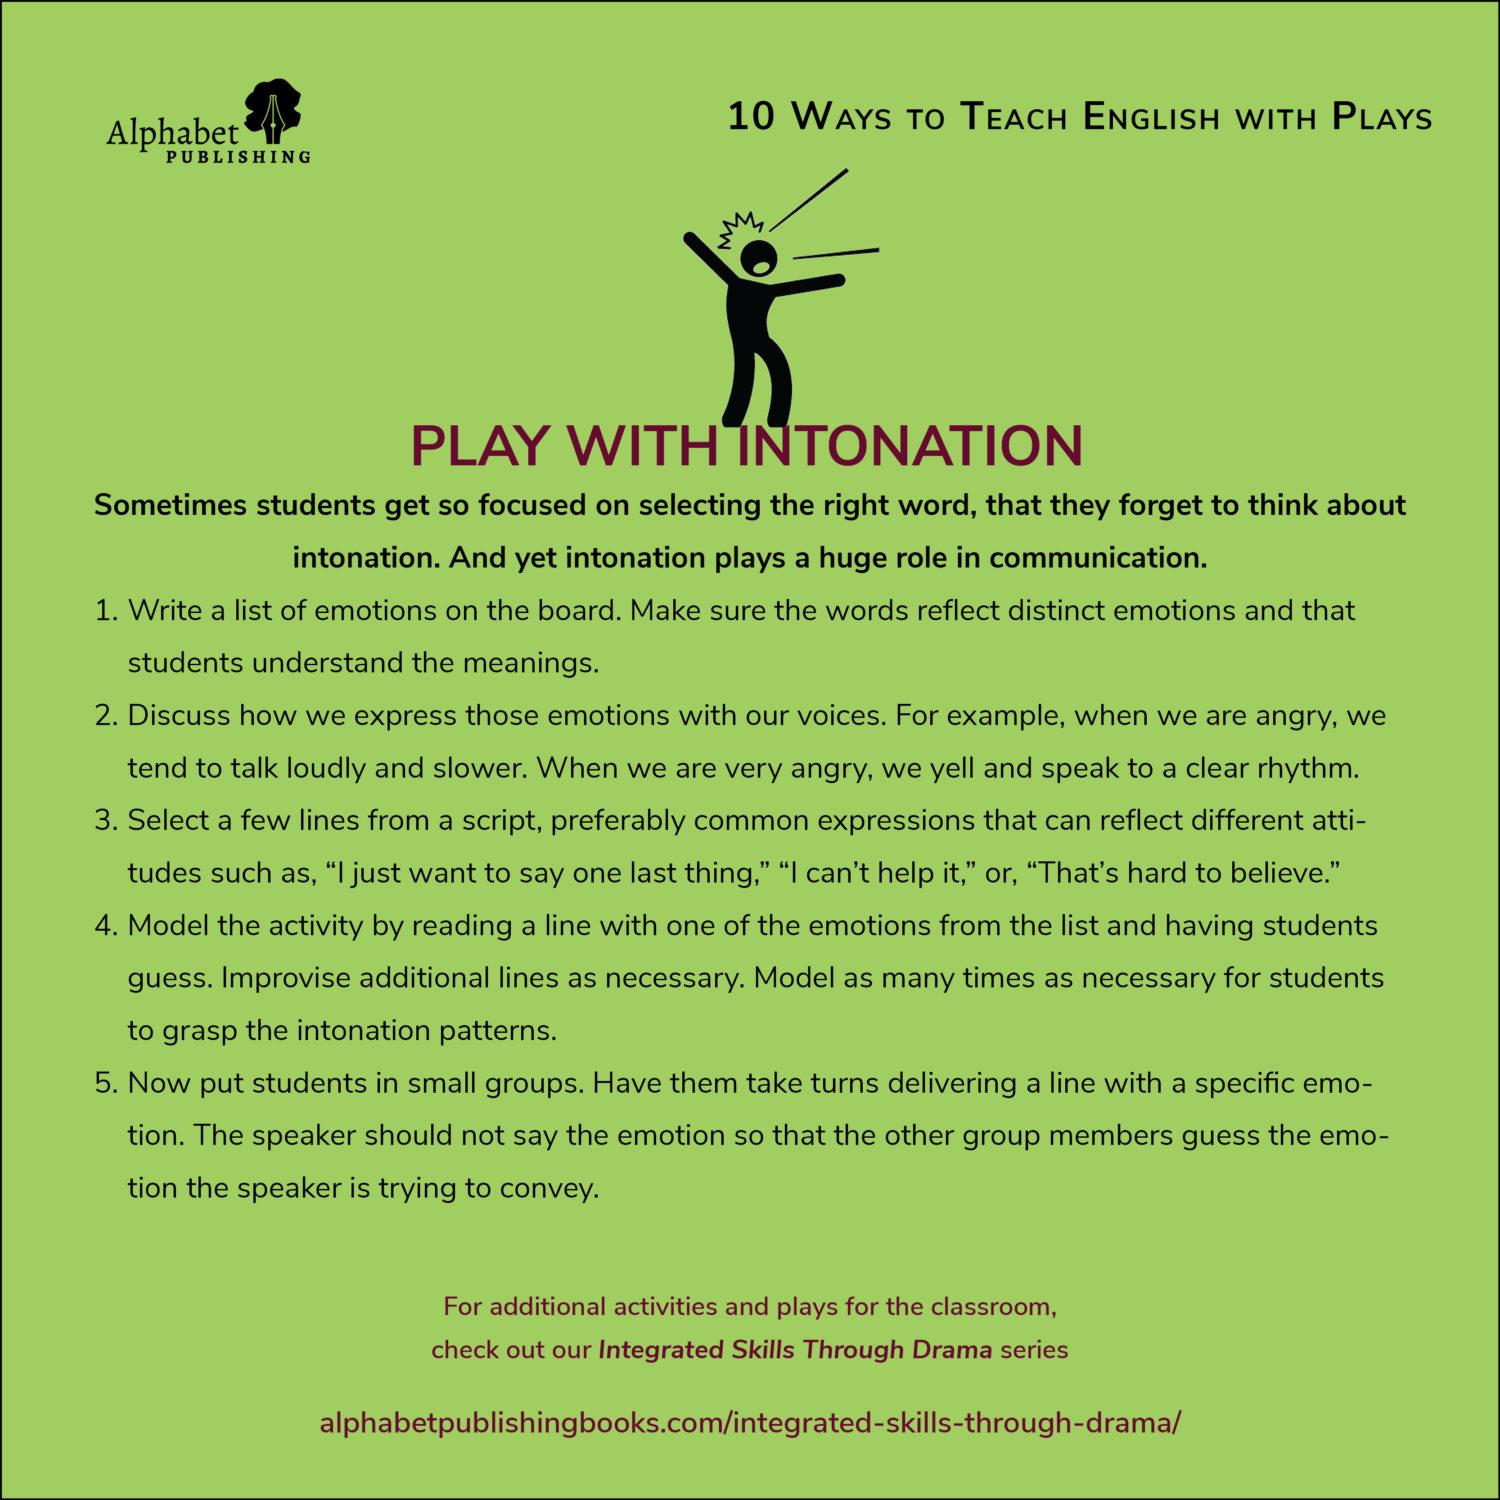 10 Ways Series Play with Intonation